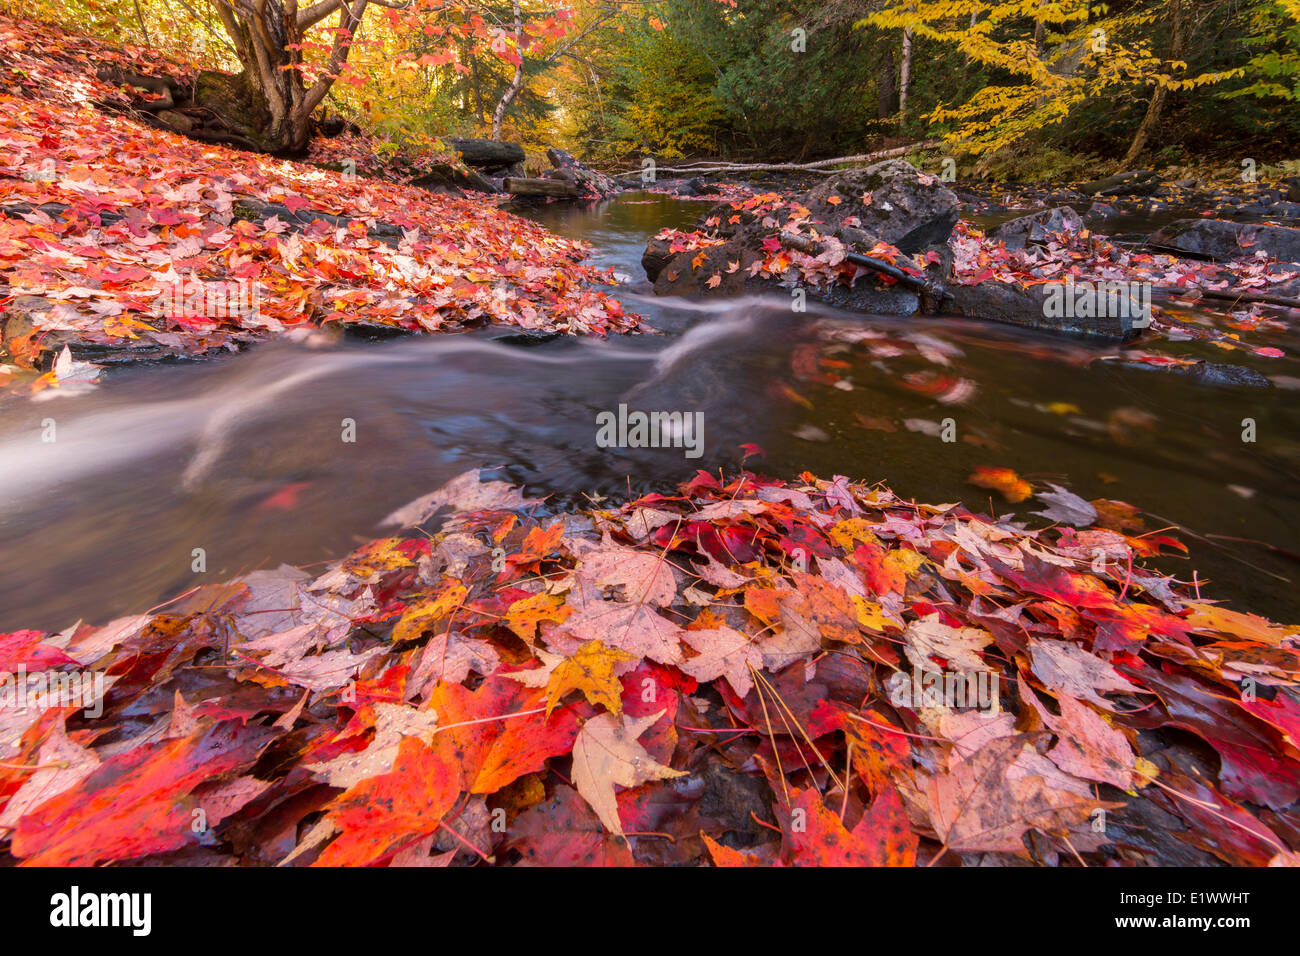 The Madawaska River flows through a carpet of red maple leaves along the Track and Tower trail in Algonquin Park. Stock Photo